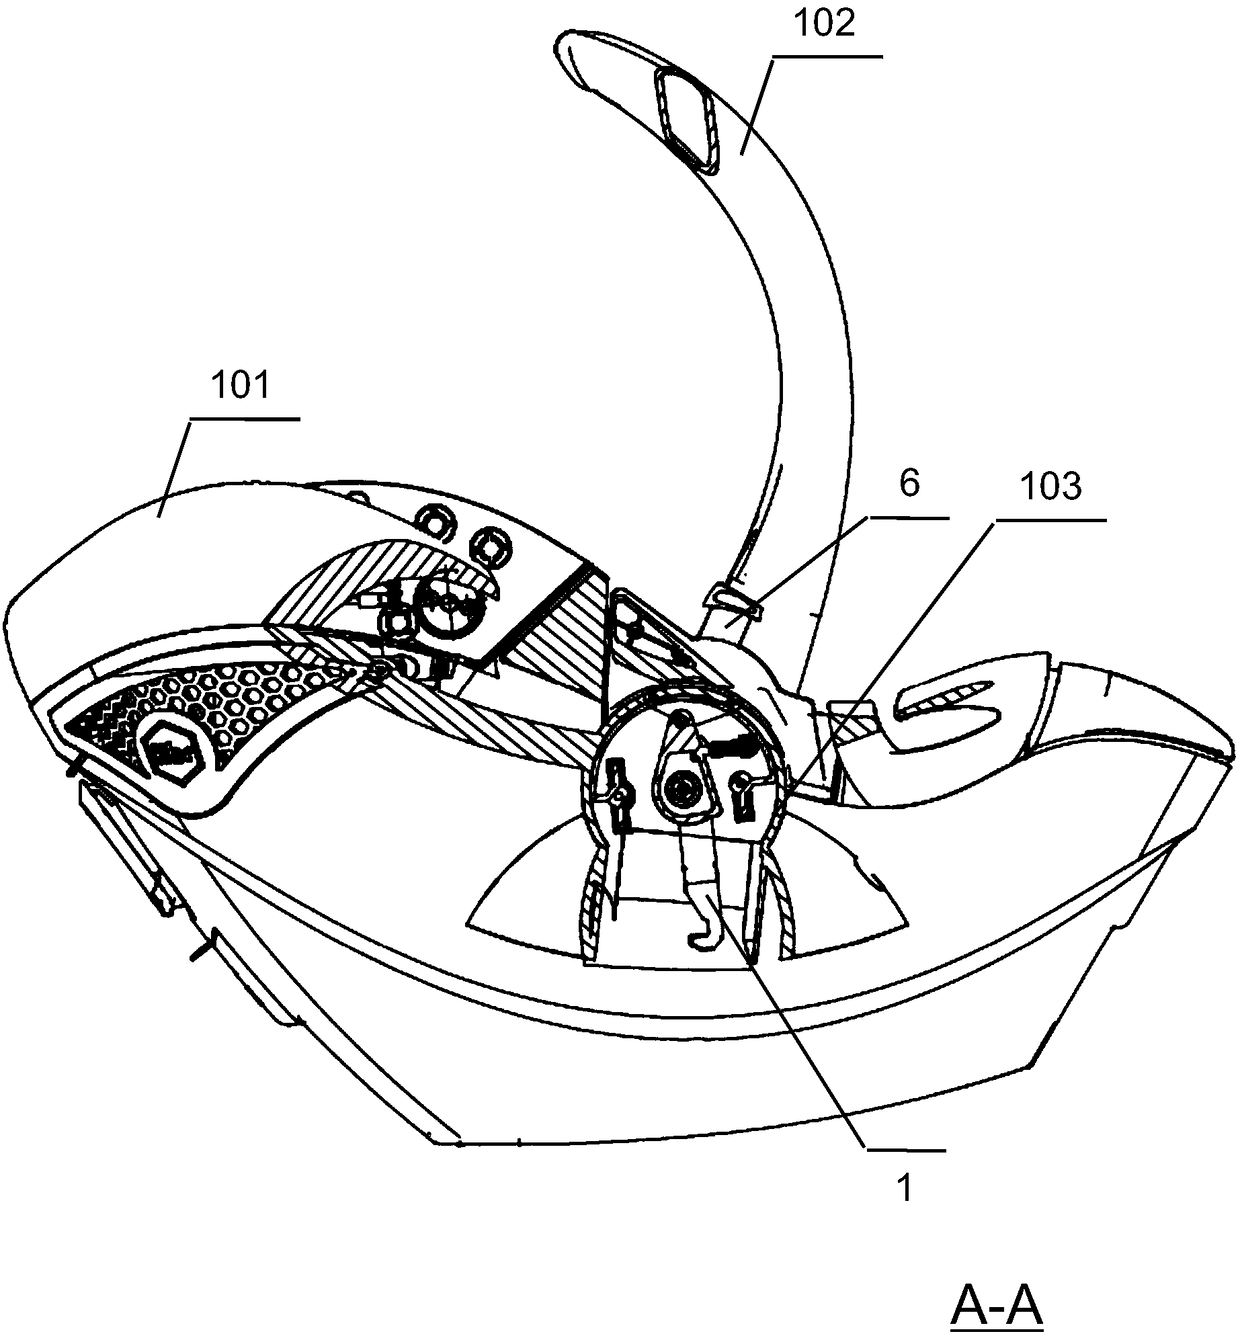 Infant carrying basket with slow rebound unlocking mechanism